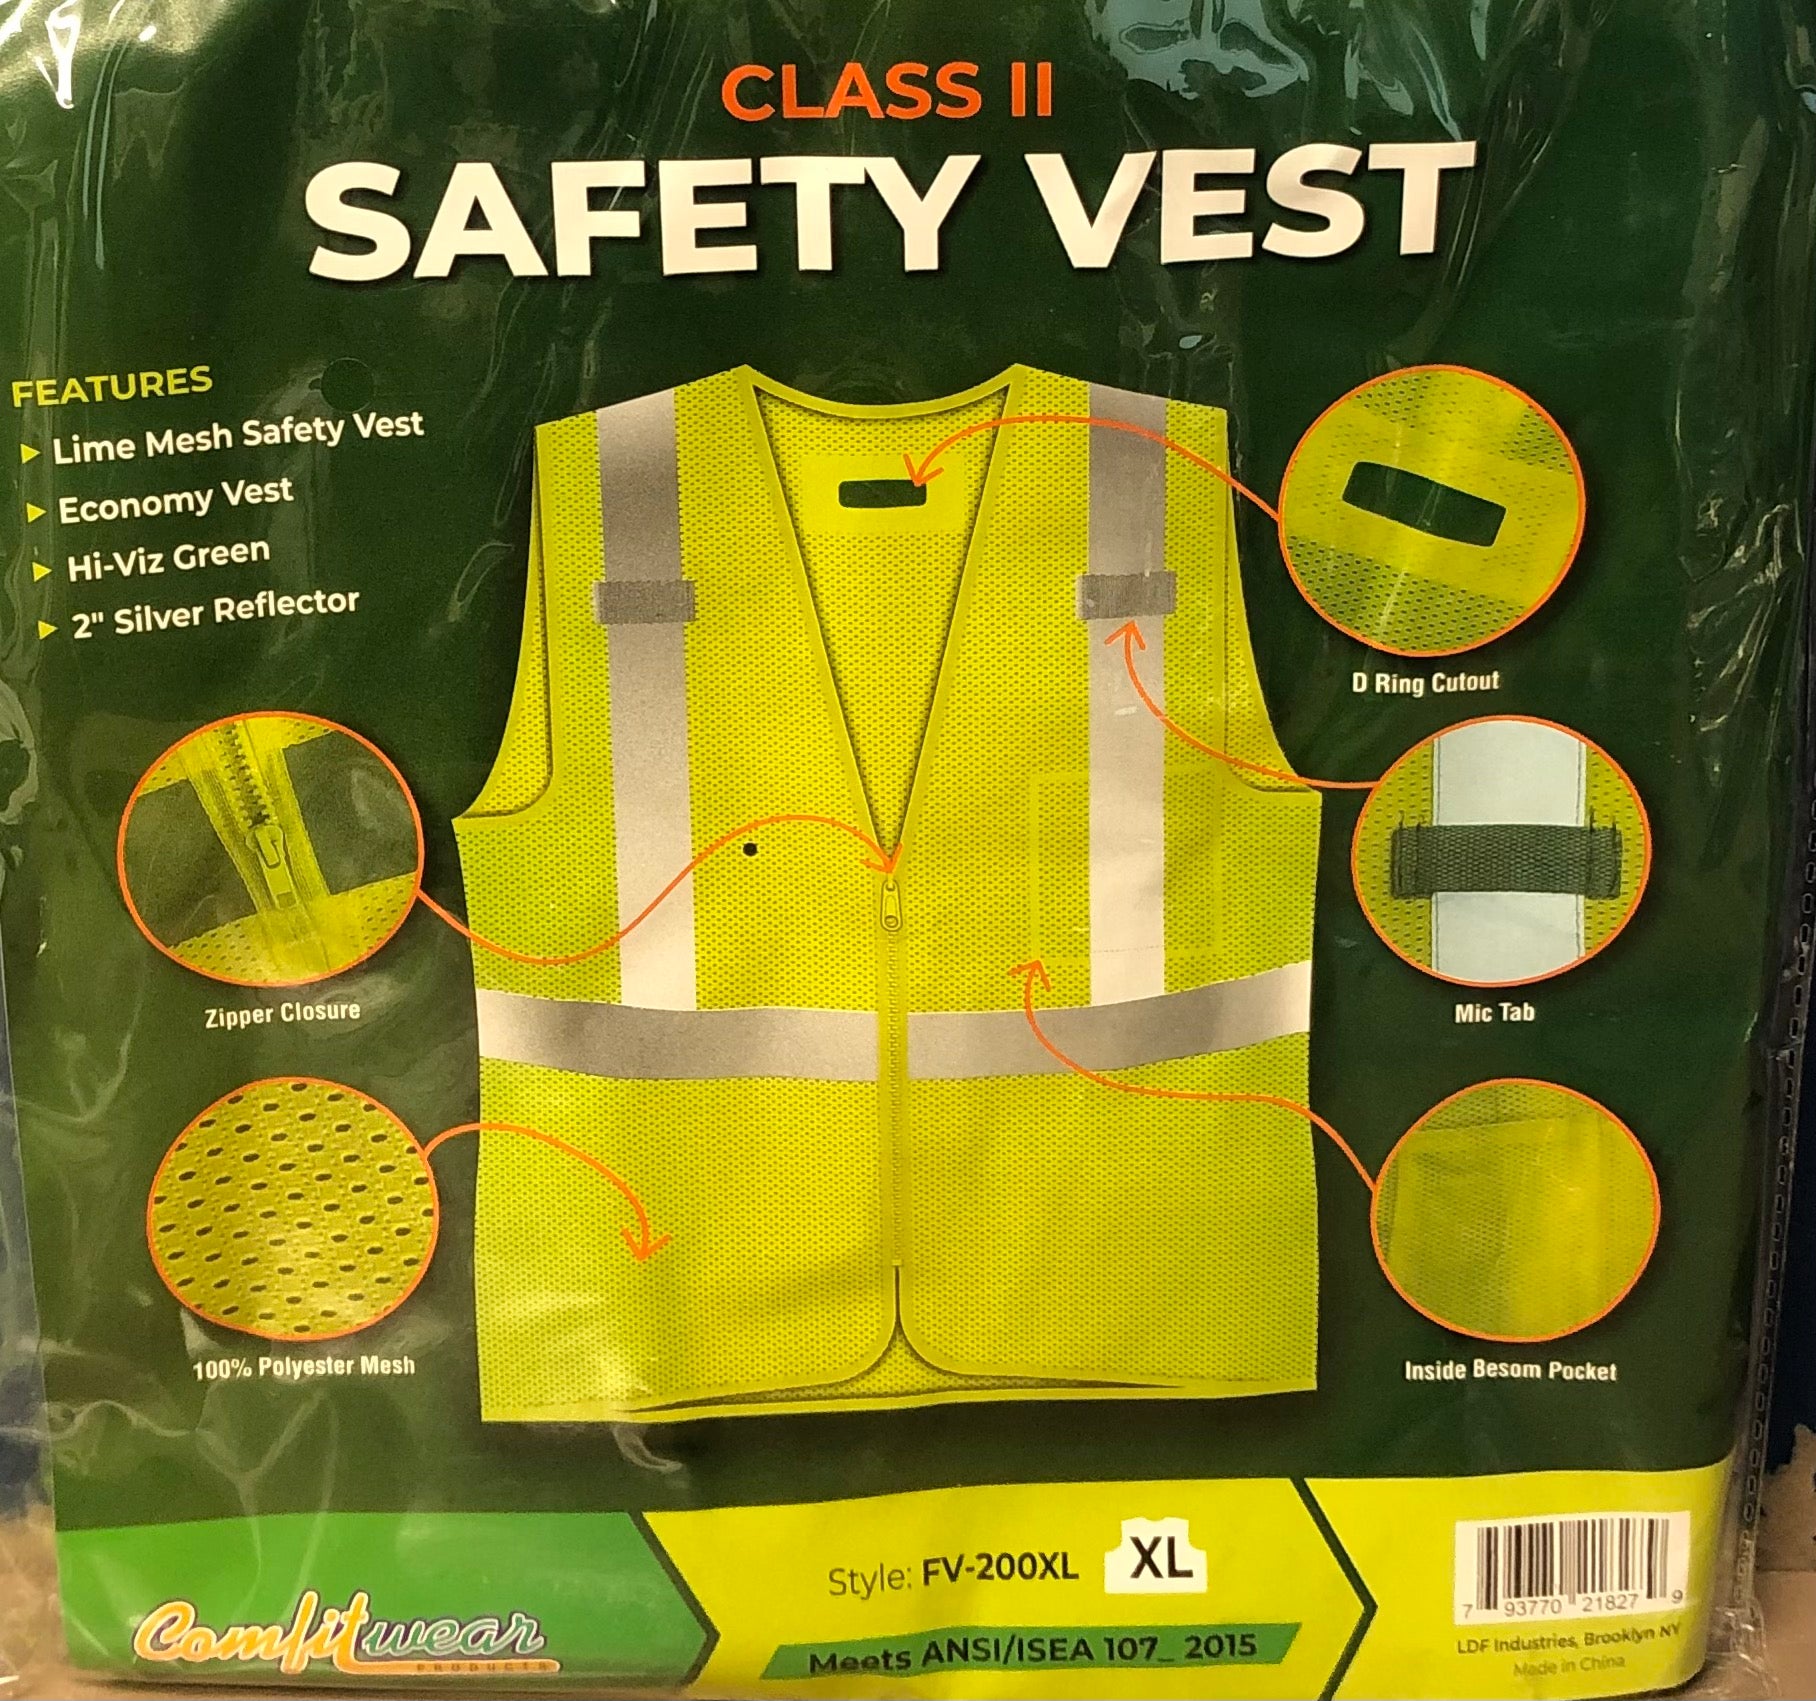 Comfitwear Products Class II Safety Vest XL